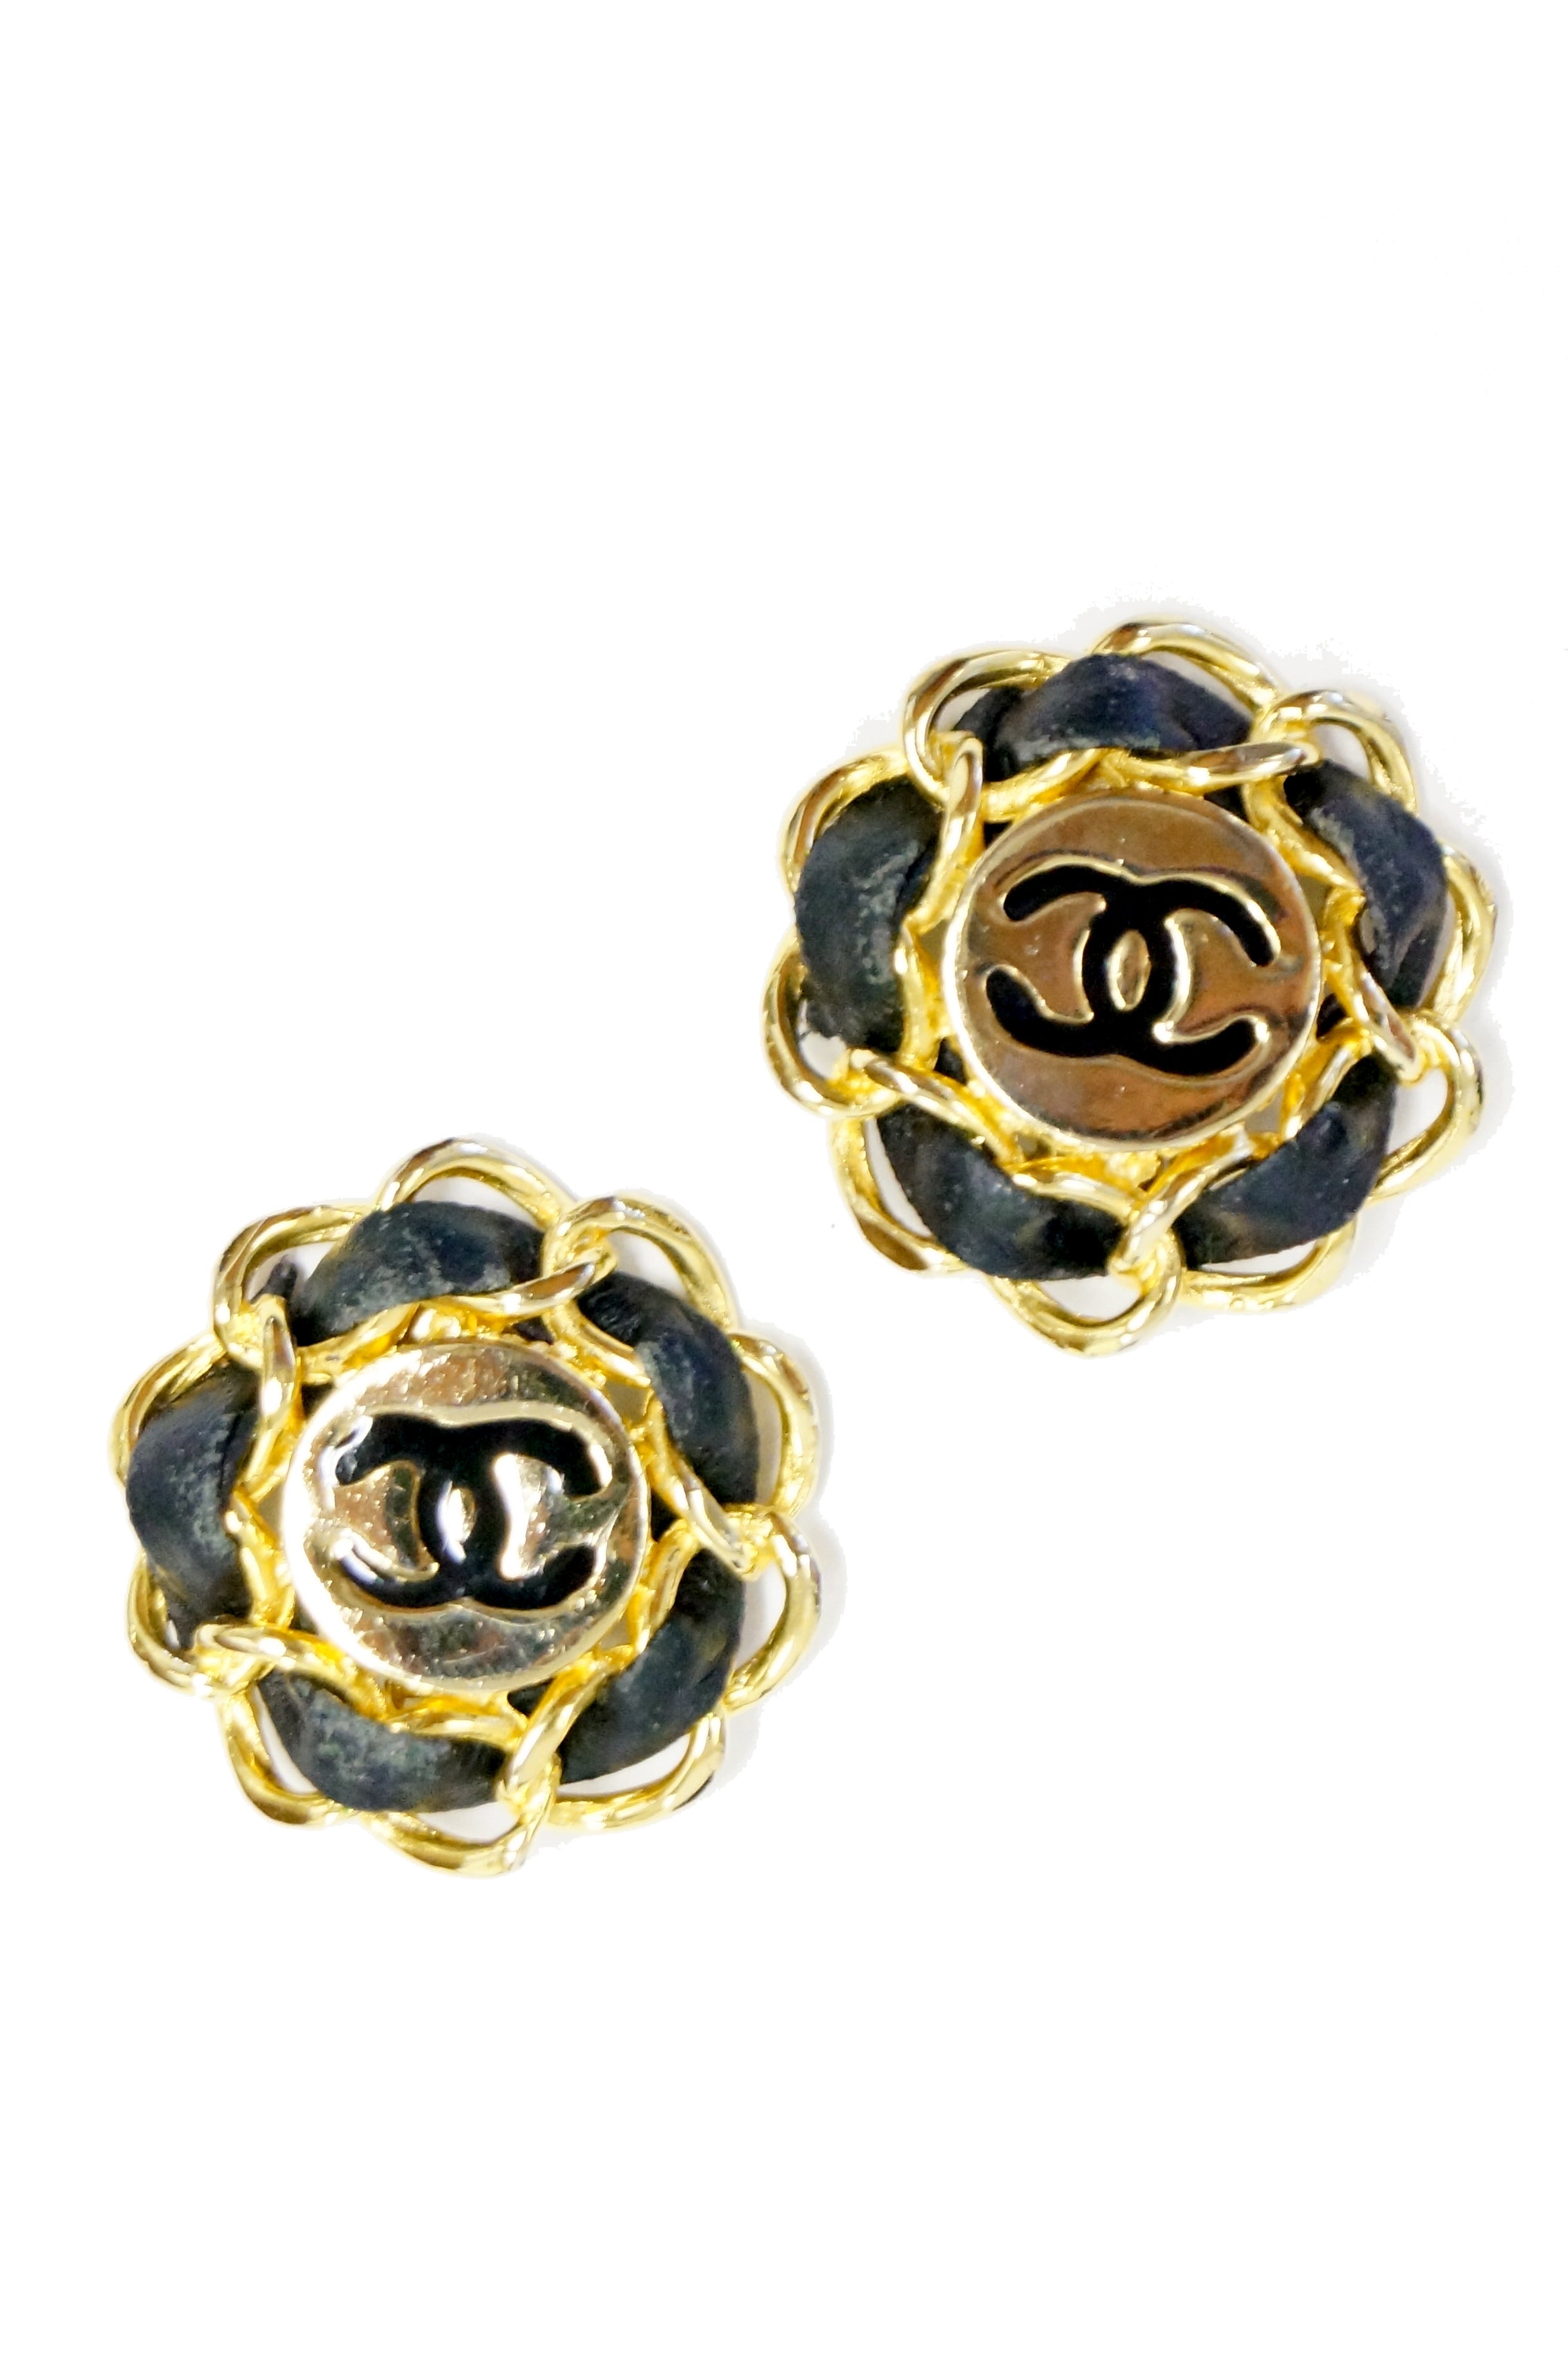 Elegant Vintage 1980s Chanel Rhinestone and Gold clip earrings